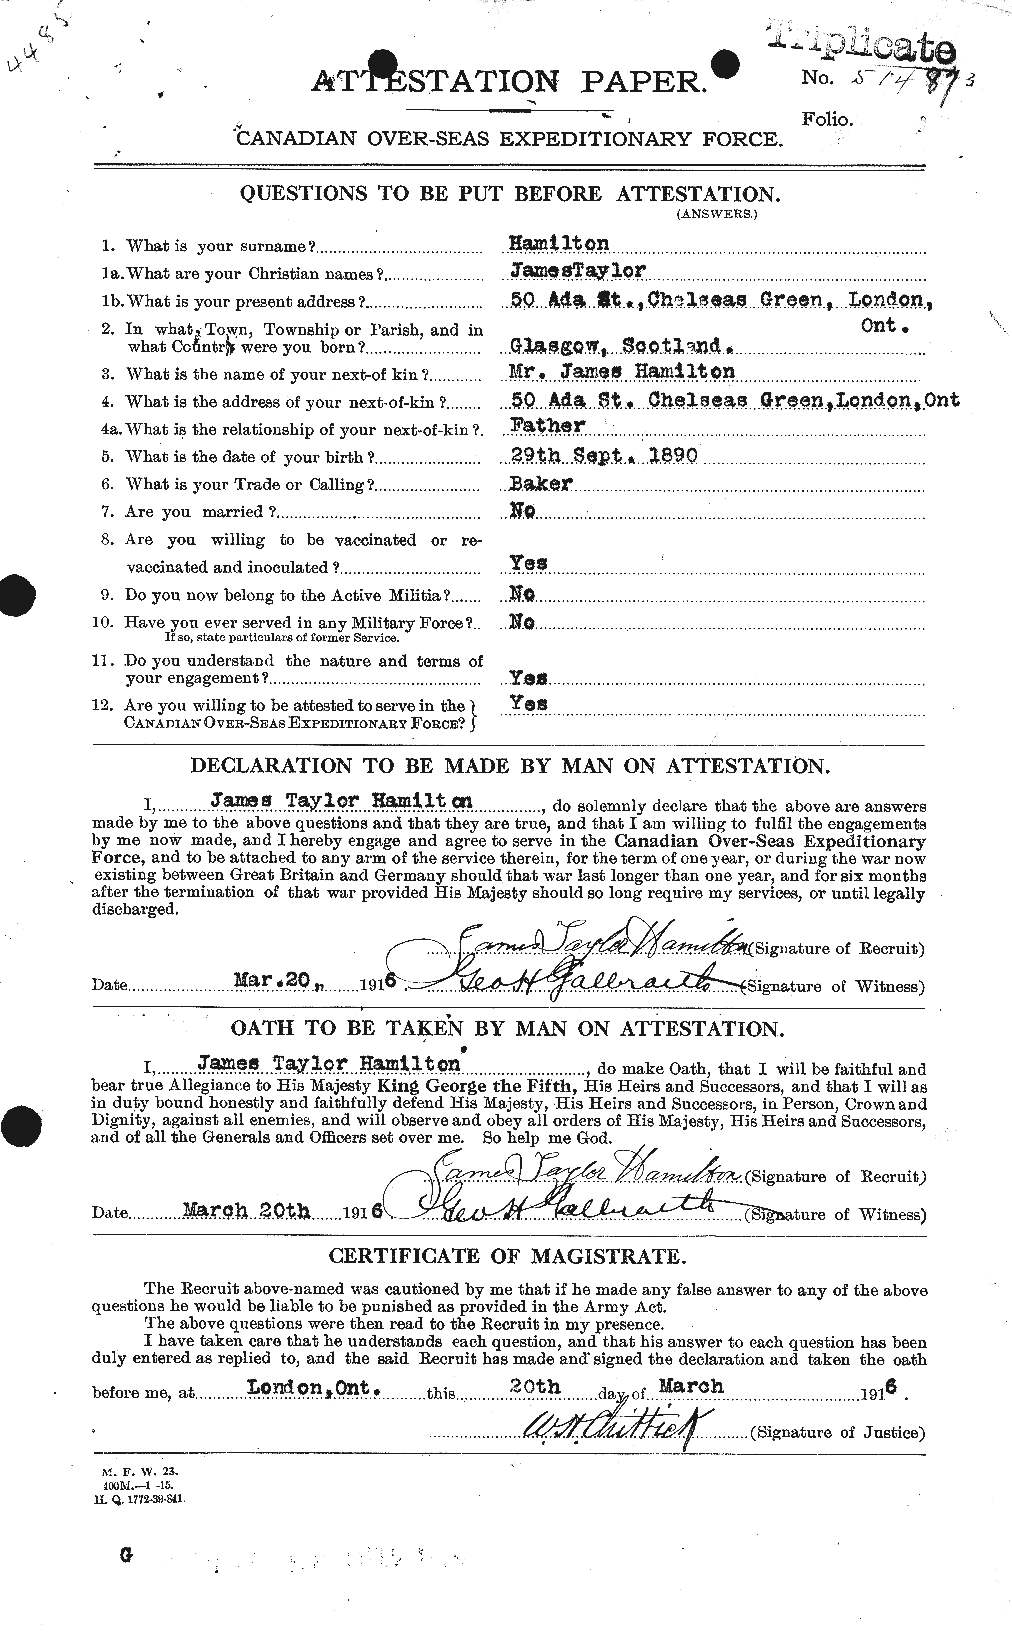 Personnel Records of the First World War - CEF 373004a